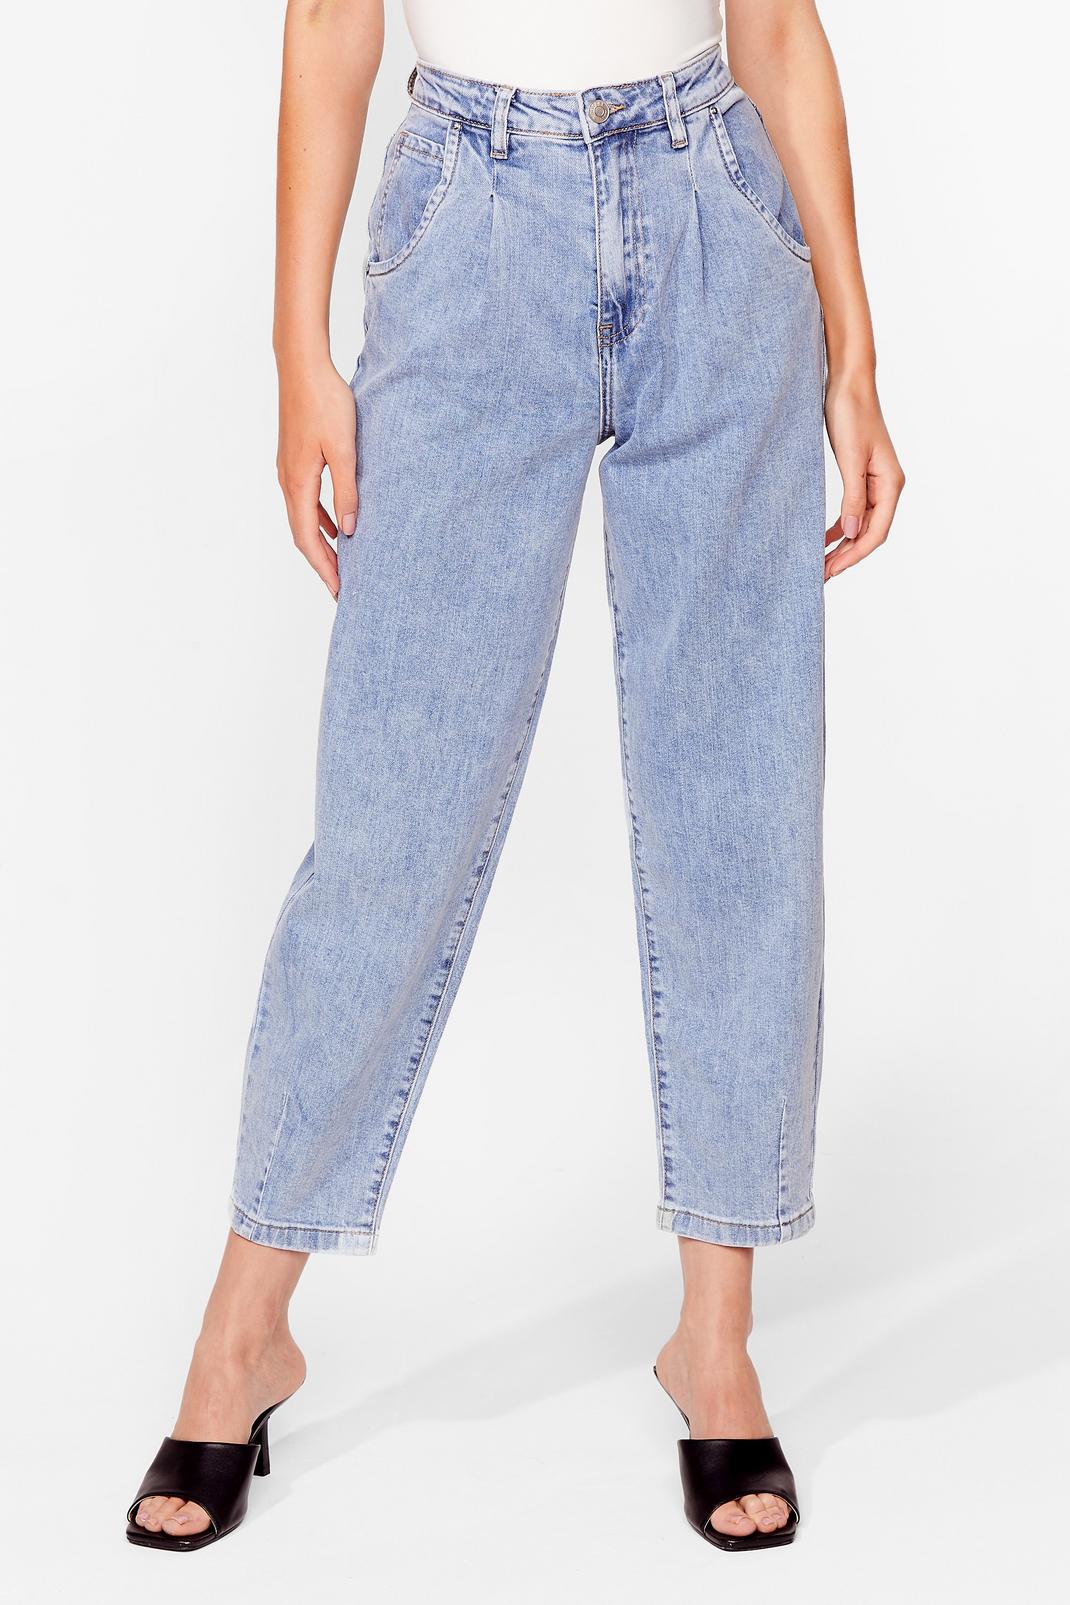 Wash Me Work It High-Waisted Relaxed Jeans image number 1